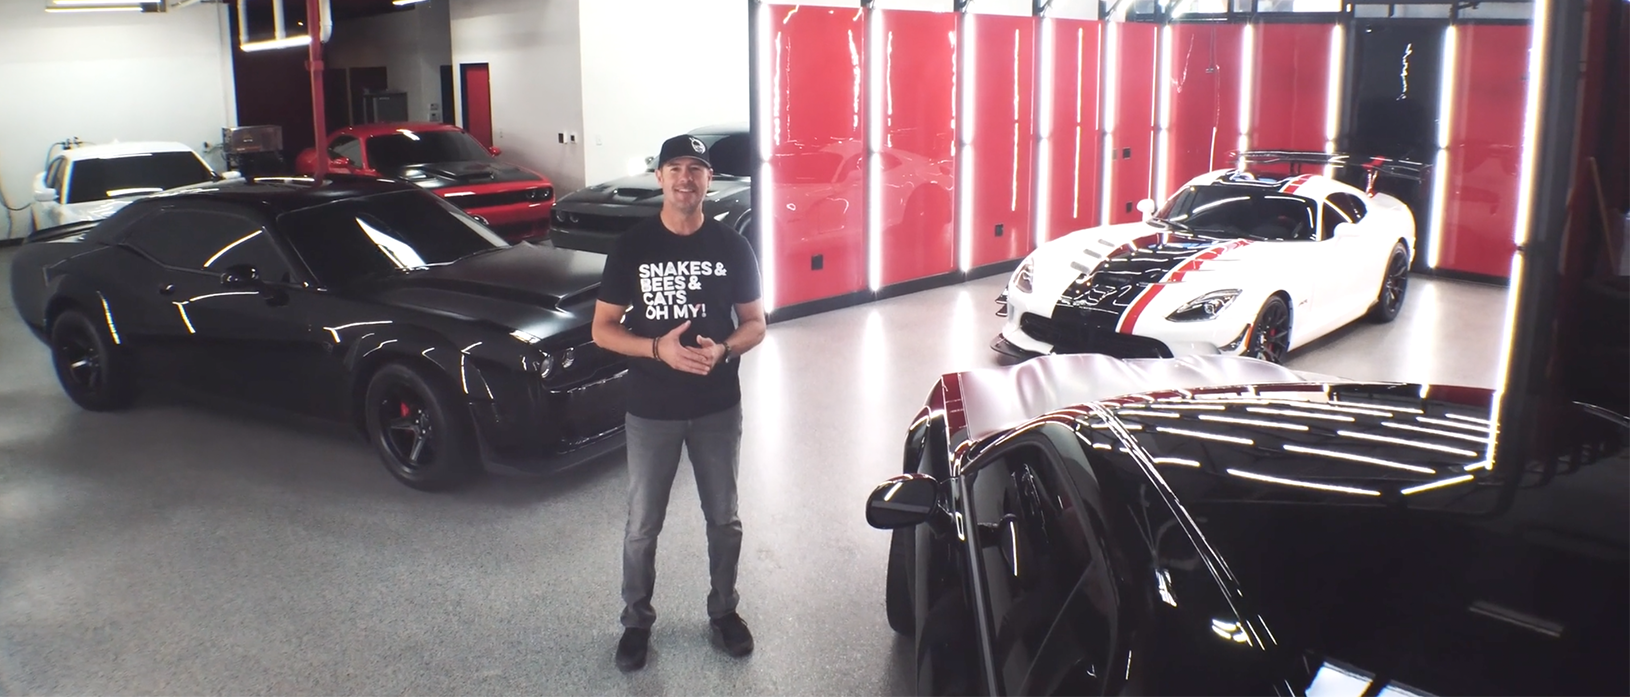 Chris Jacobs in a garage with cars